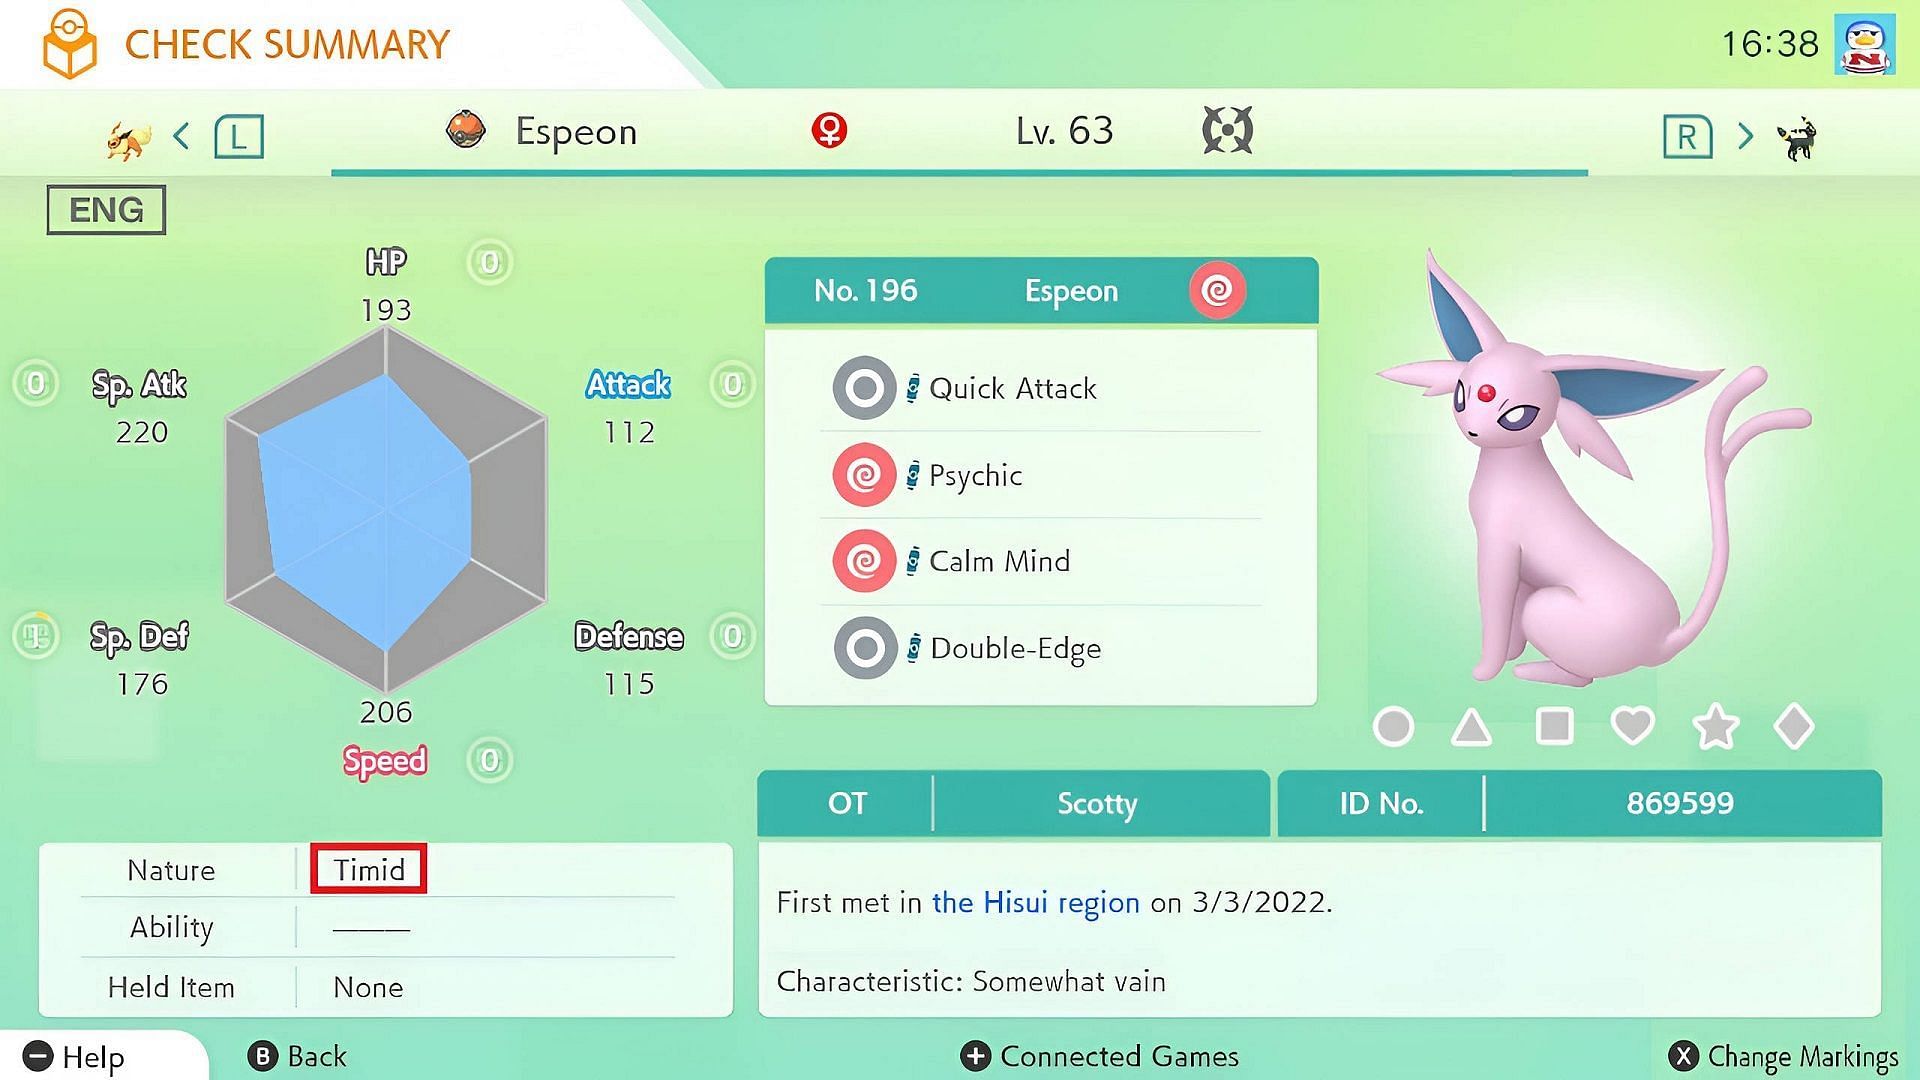 Nature Pokemon: Every Nature And Which Stats They Change (Easy Guide)